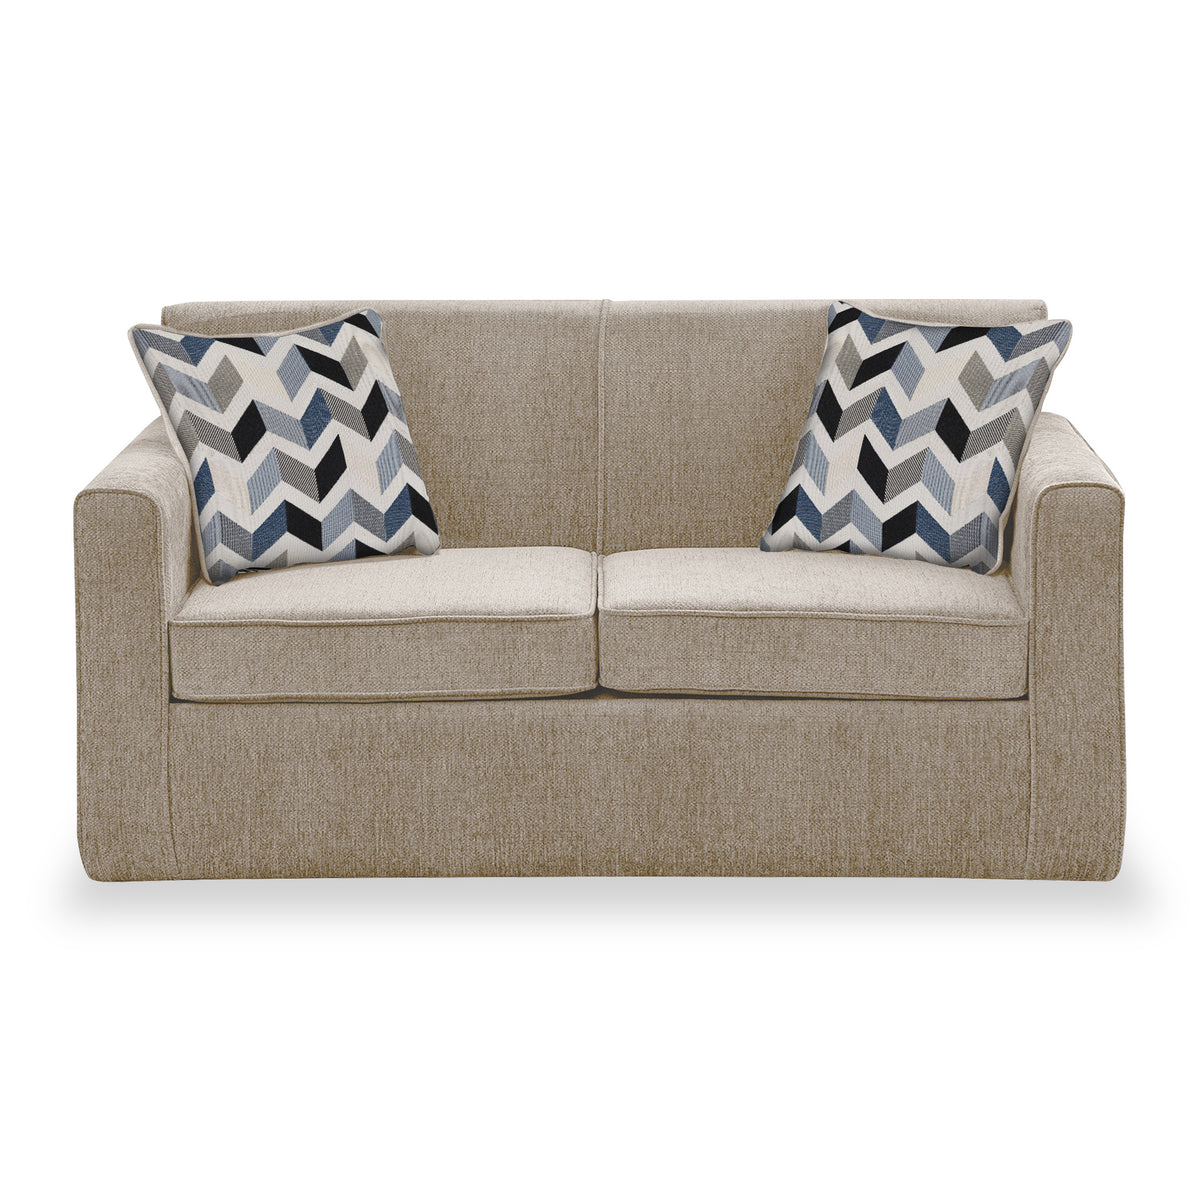 Welton Fawn Soft Weave 2 Seater Sofa Bed with Morelisa Denim Cushions